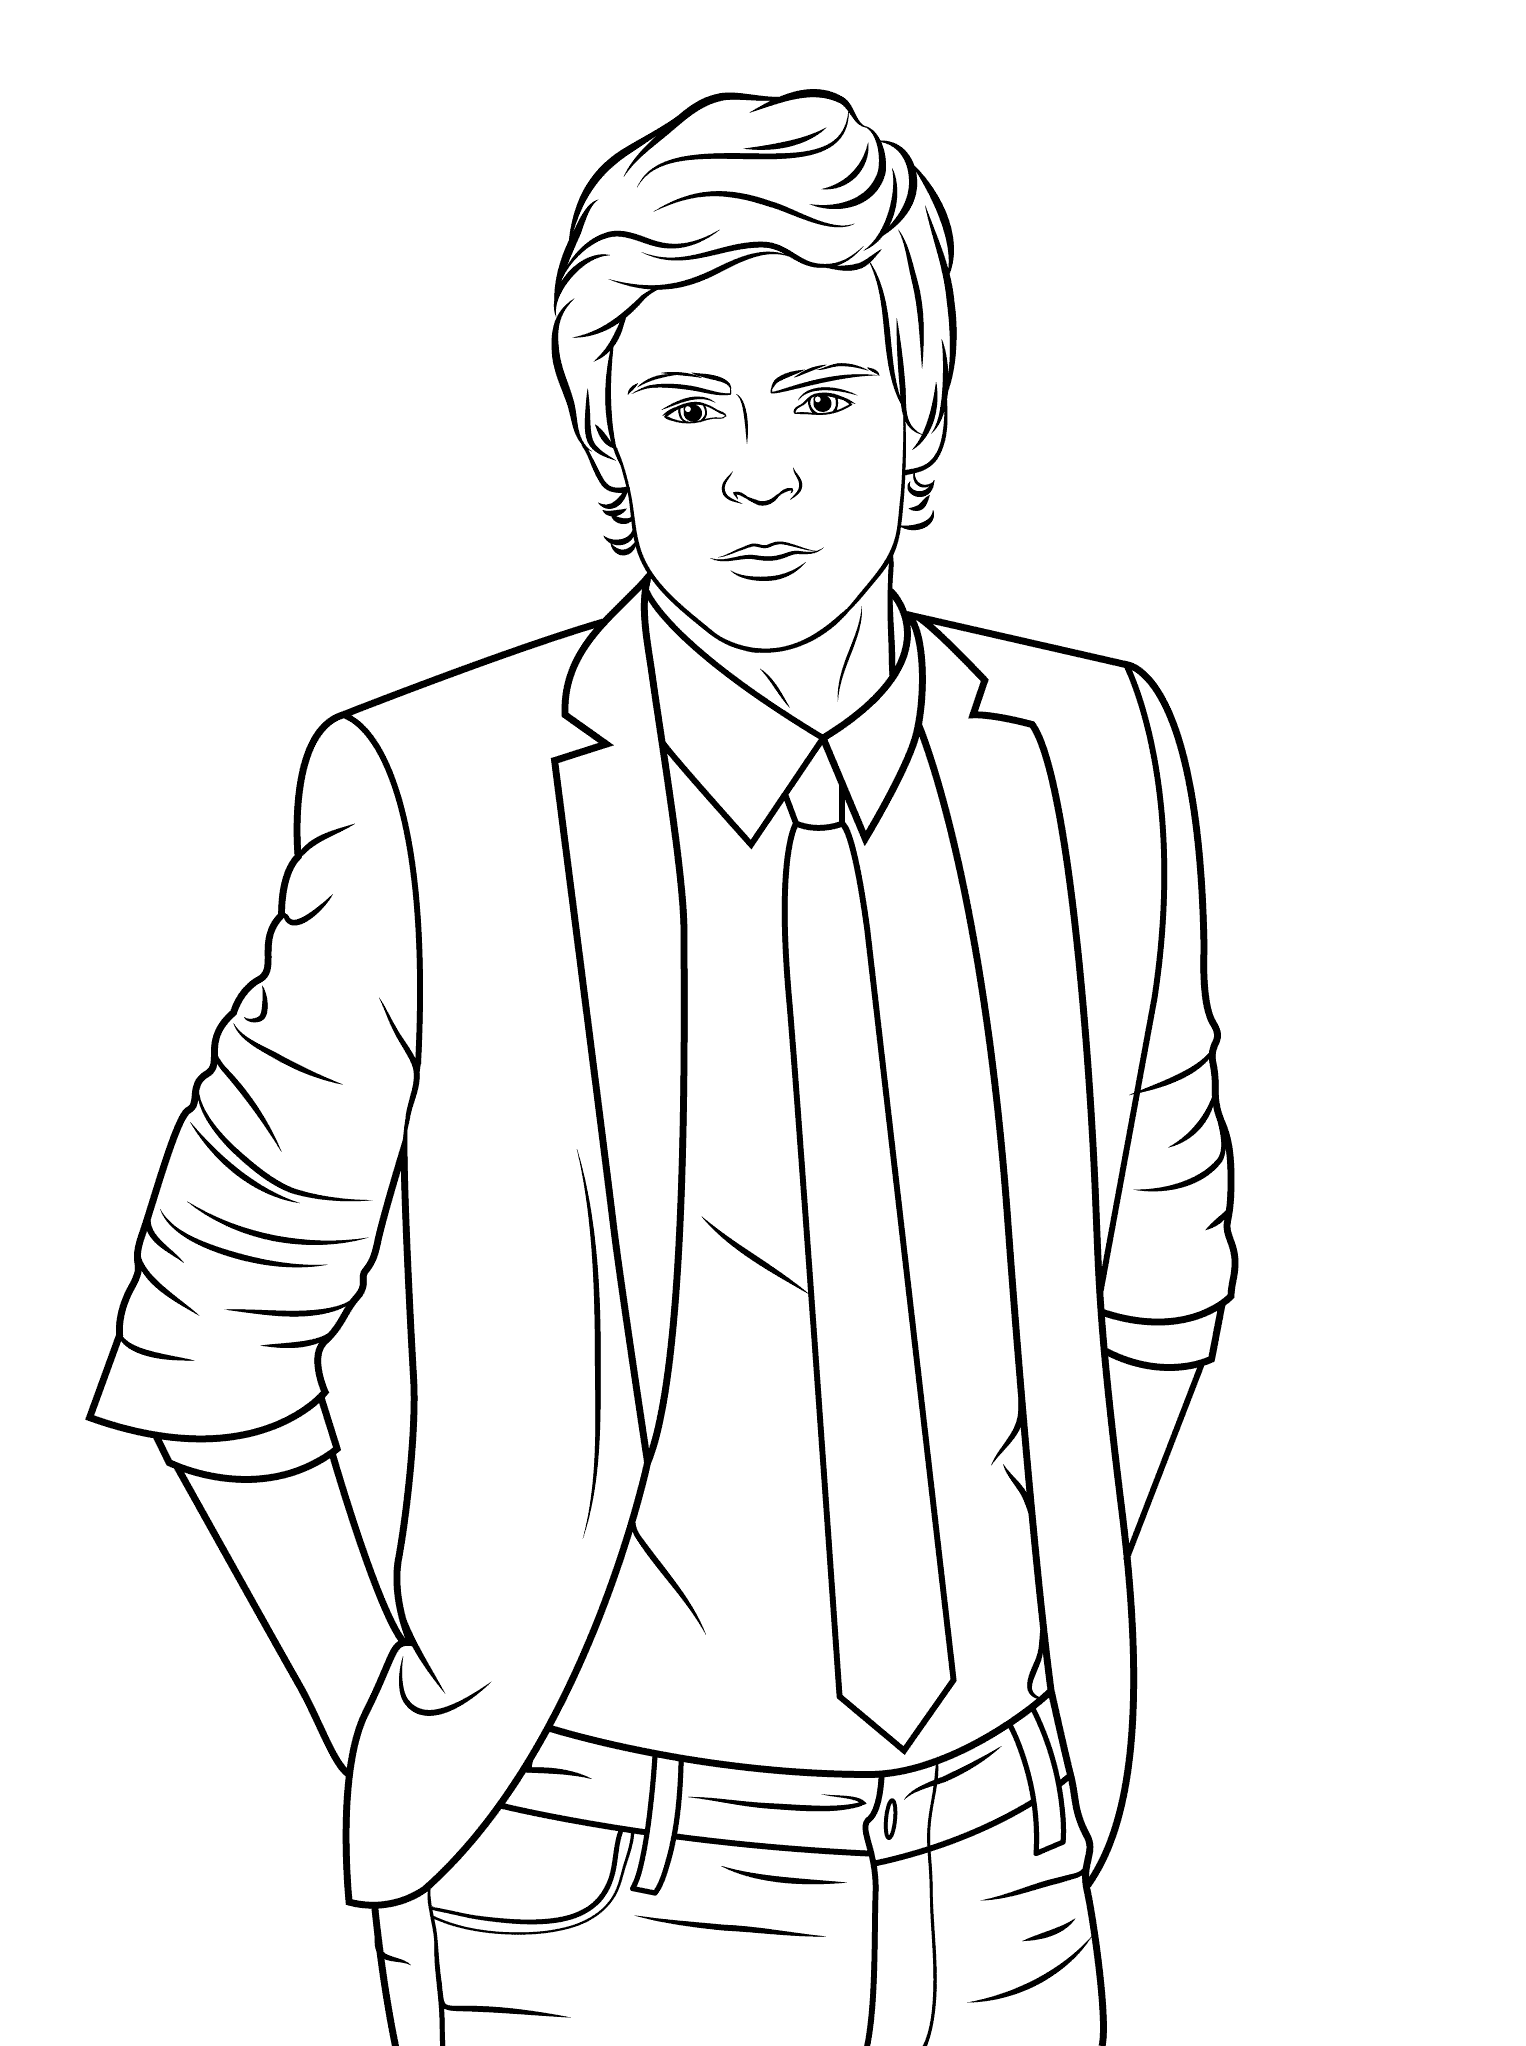 Zac Efron Celebrity Coloring Page